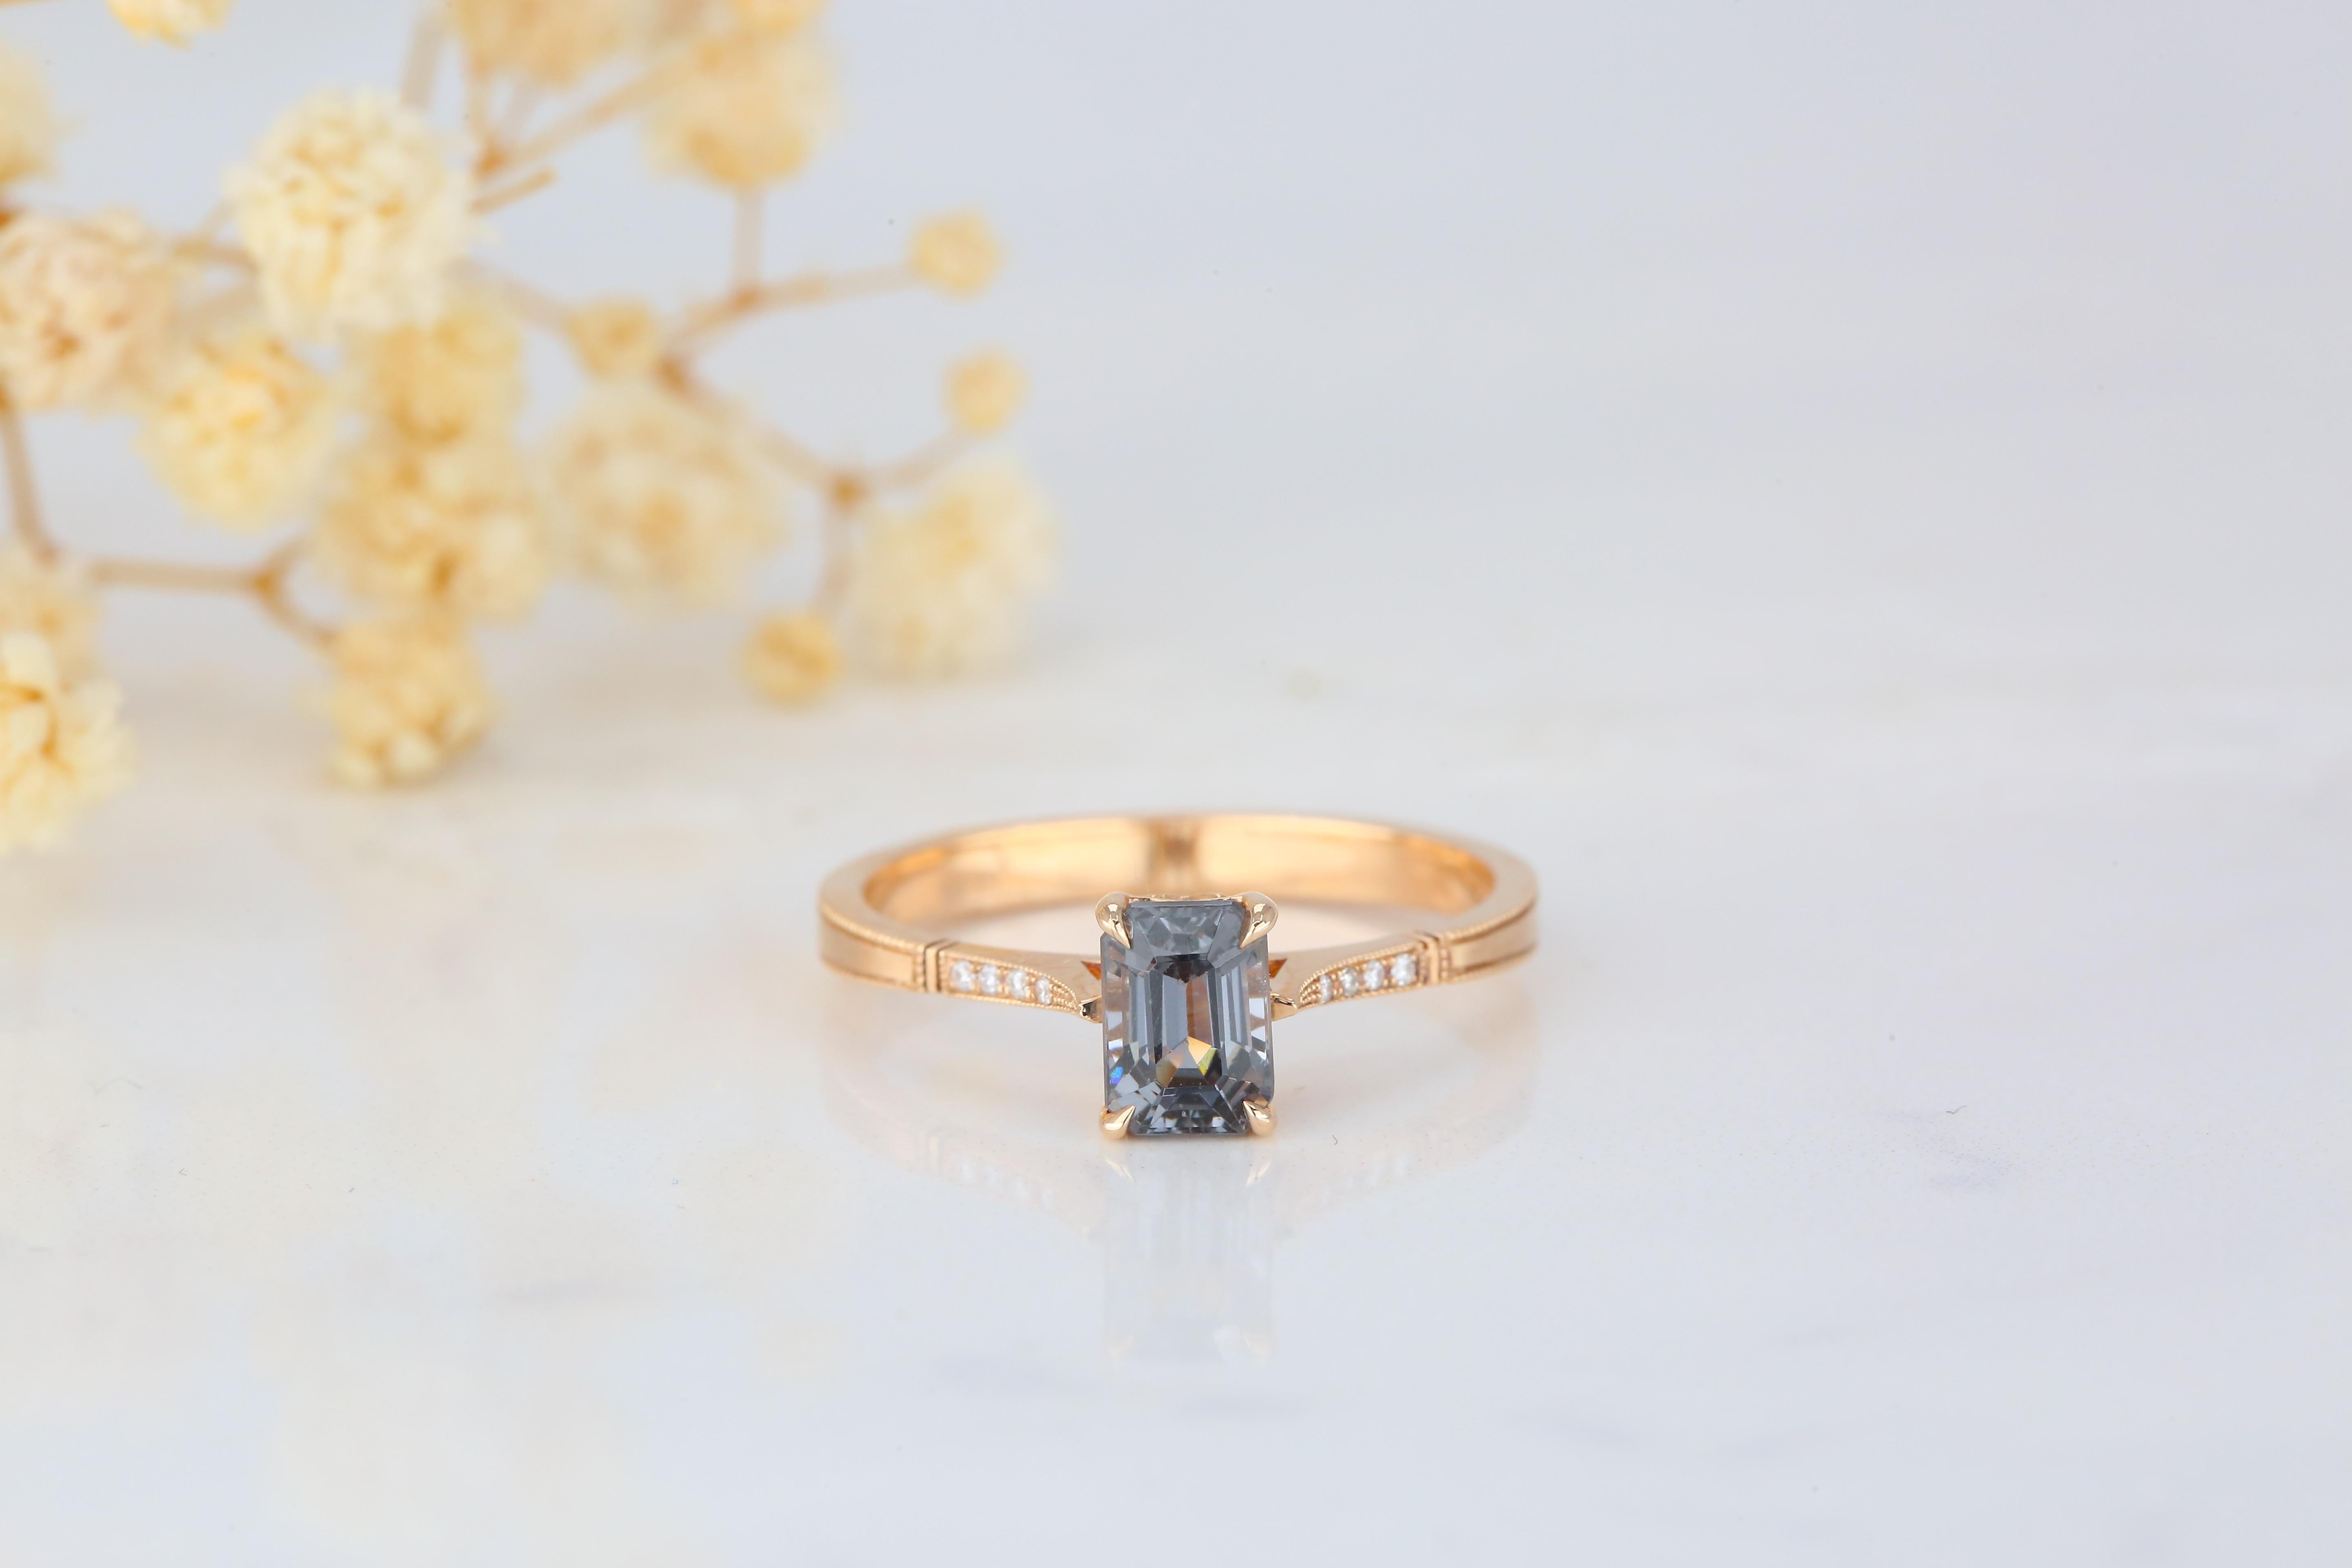 Vintage Style 0.99 Ct Emerald Cut Spinel with Diamond Engagement Ring, 14K Solitaire Ring, created by hands from ring to the stone shapes.

I used brillant spinel in vintage style for lovers of vintage style engagement ring. I completed these in 14K